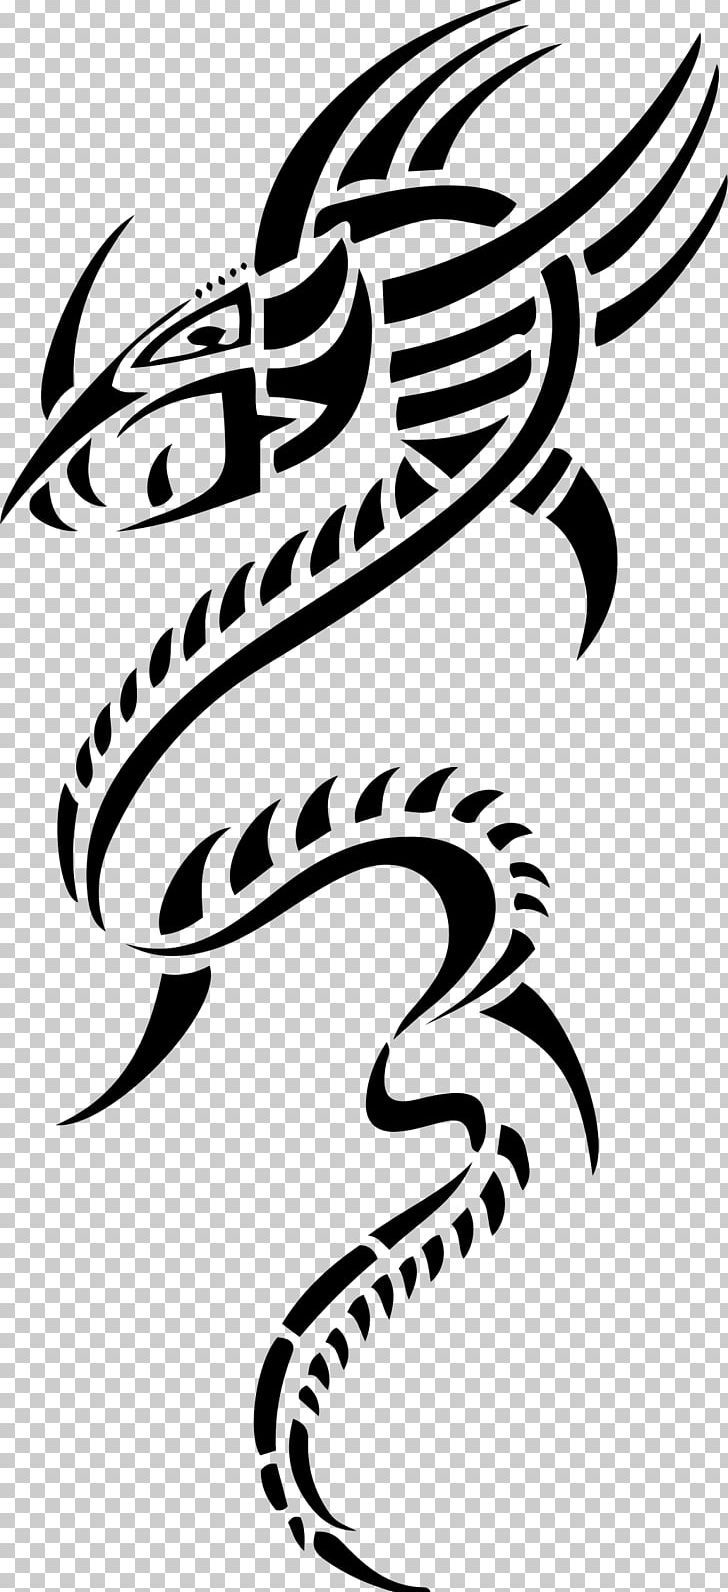 Tattoo Artist Flash PNG, Clipart, Art, Artwork, Black, Black And White, Clip Art Free PNG Download